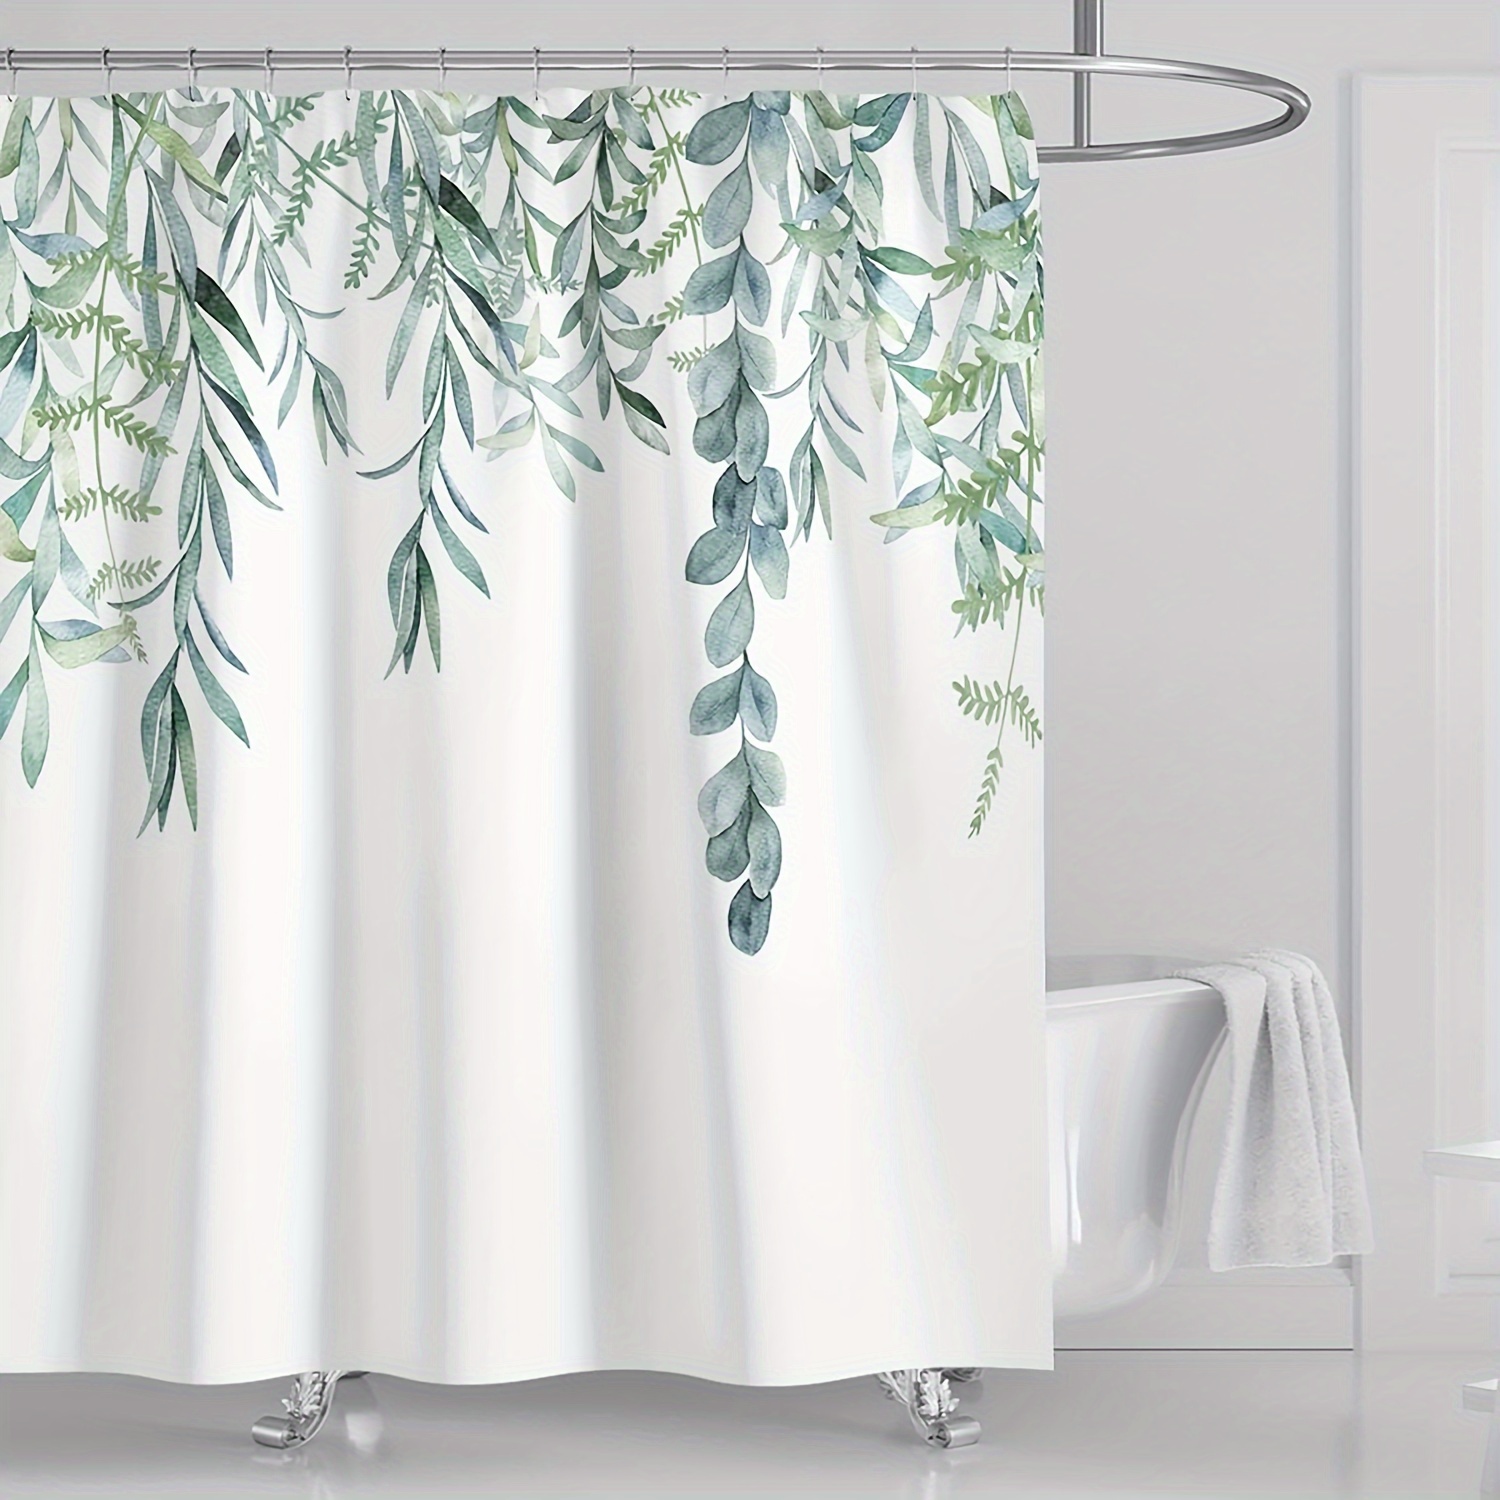 

1pc Shower Curtain, Bathroom Shower Curtain, 3d Printed Nordic Watercolor Floral Green Printed Shower Curtain, Waterproof Shower Curtain With 12 Hooks